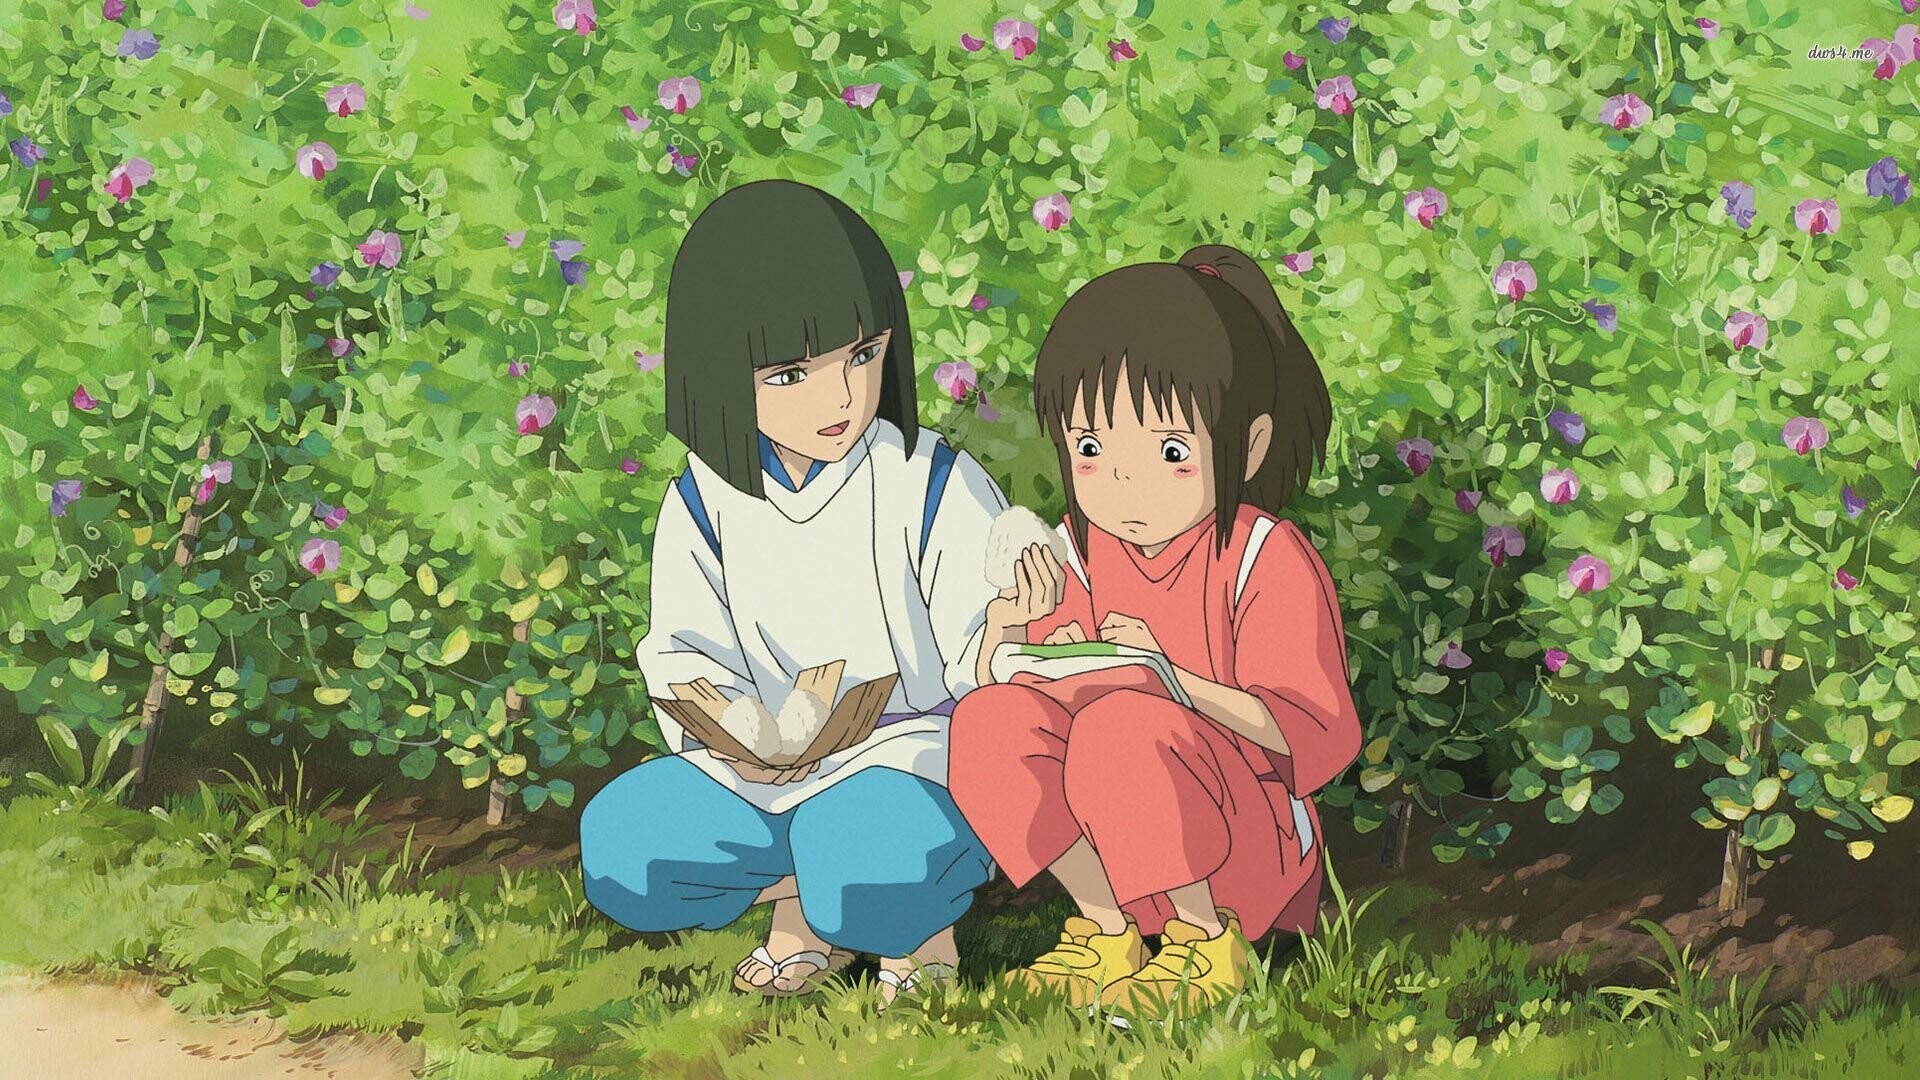 Spirited Away: Chihiro, Animated film, One of Ghibli's most well-known works. 1920x1080 Full HD Wallpaper.